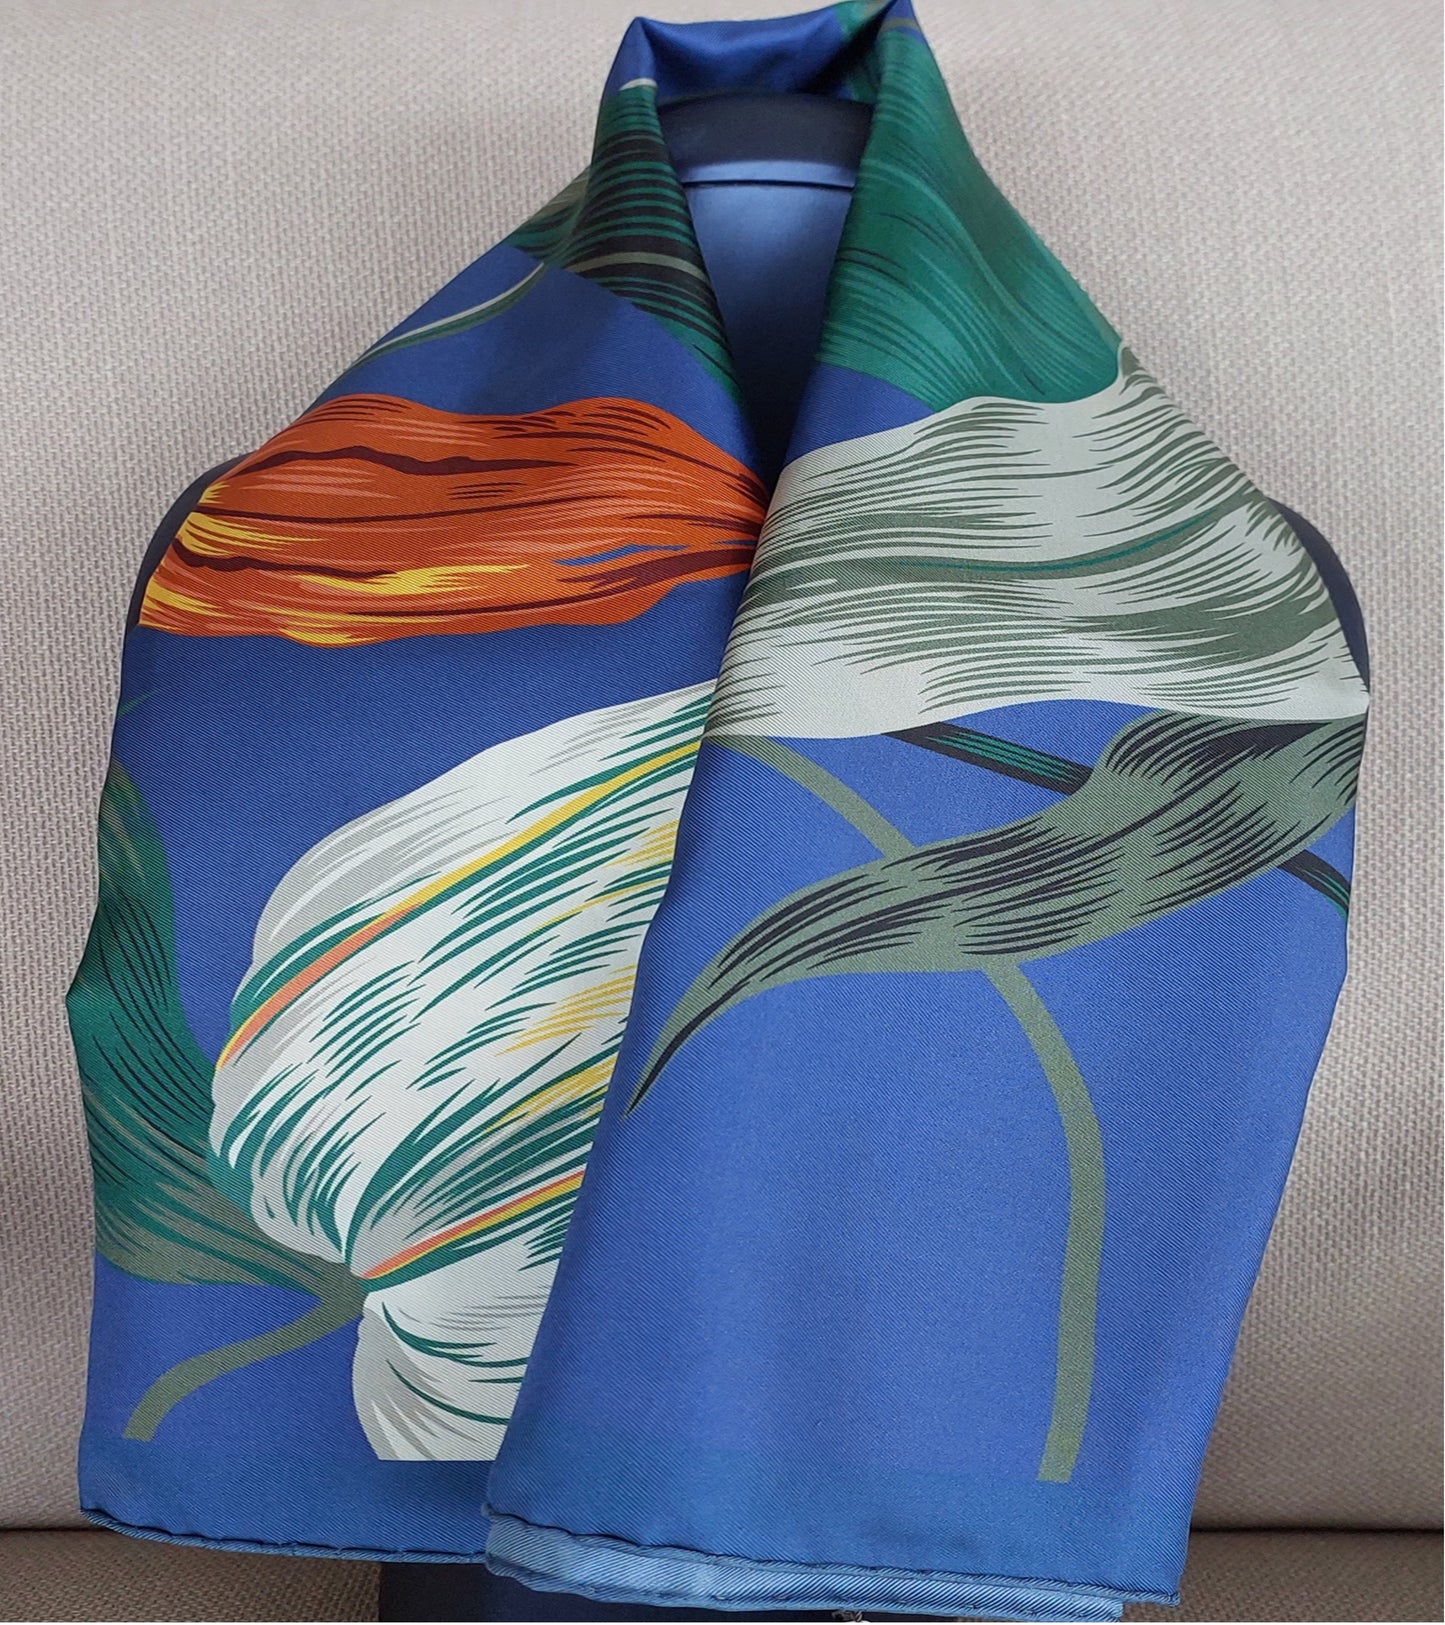 Woman Scarf 100% Silk Twill 90x90 Big Flowers Design Blue Green Colors Hand-rolled Great Gift for Her